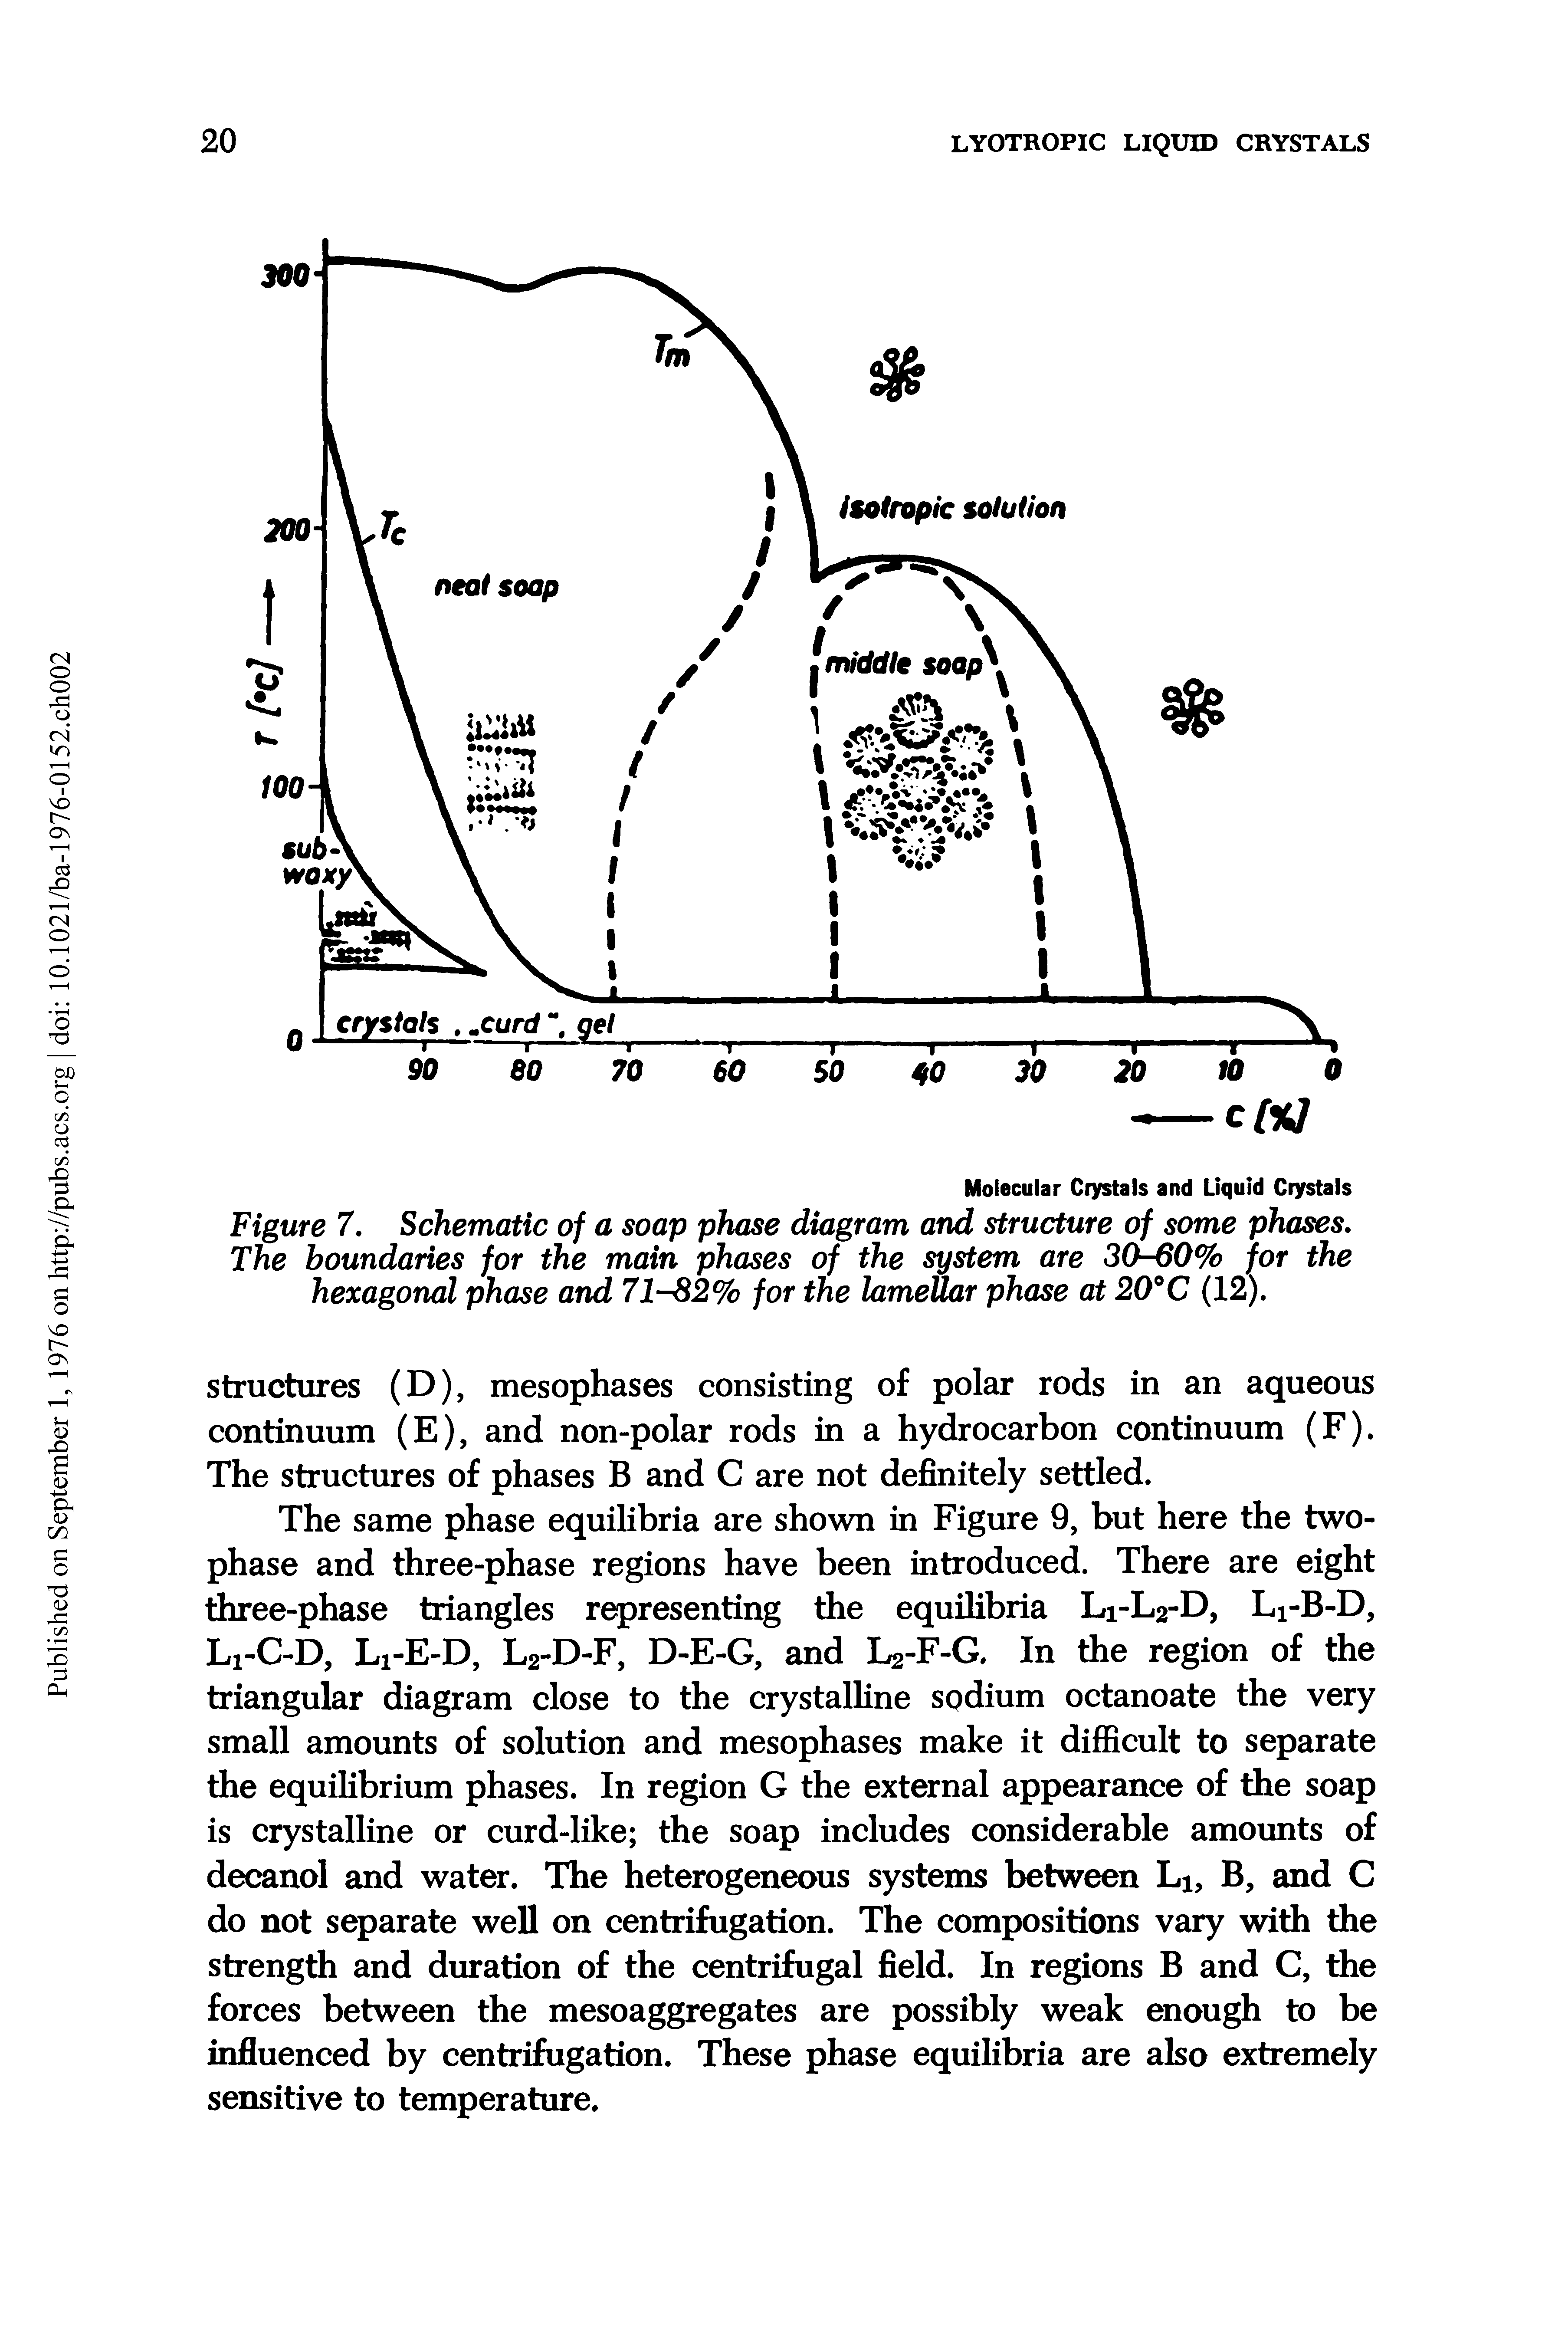 Figure 7. Schematic of a soap phase diagram and structure of some phases.